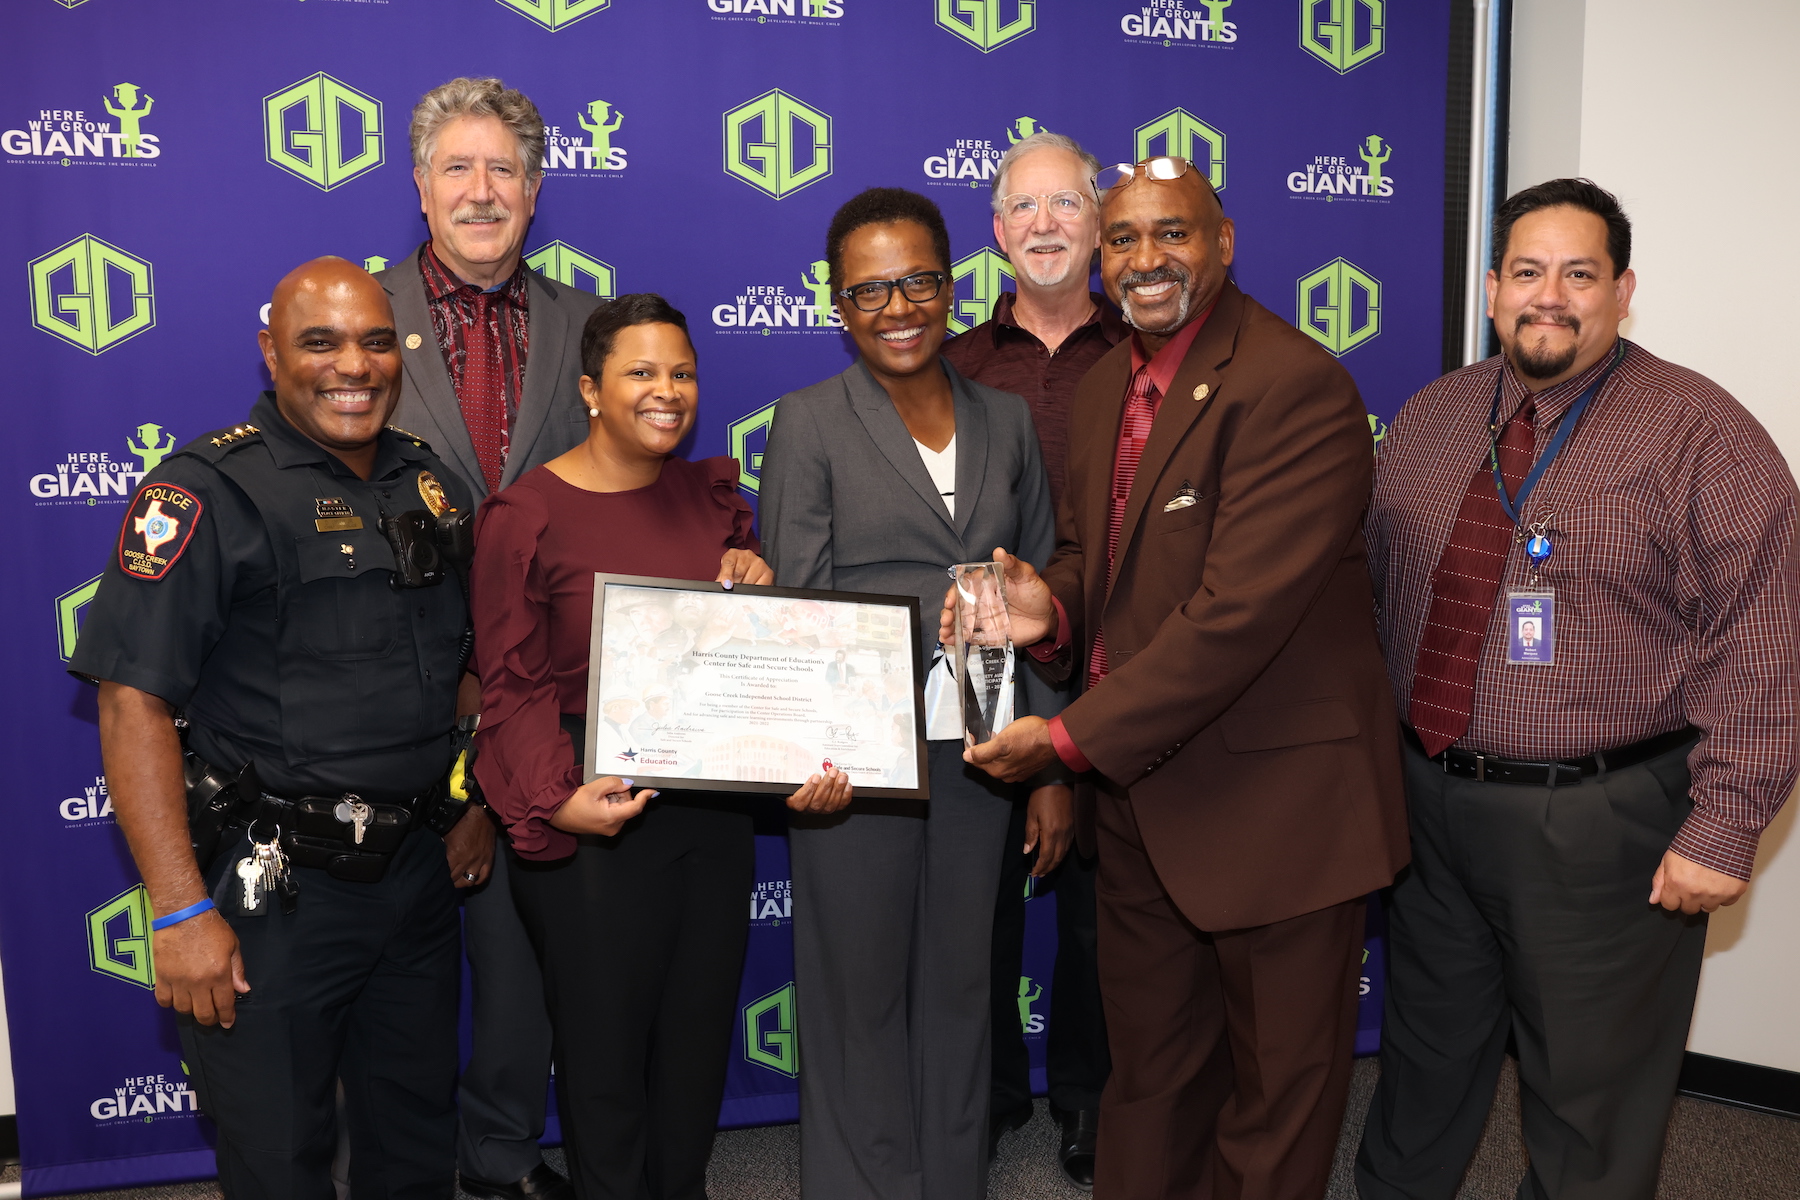 Chief davis and district administrators pose with HCDE Center employees